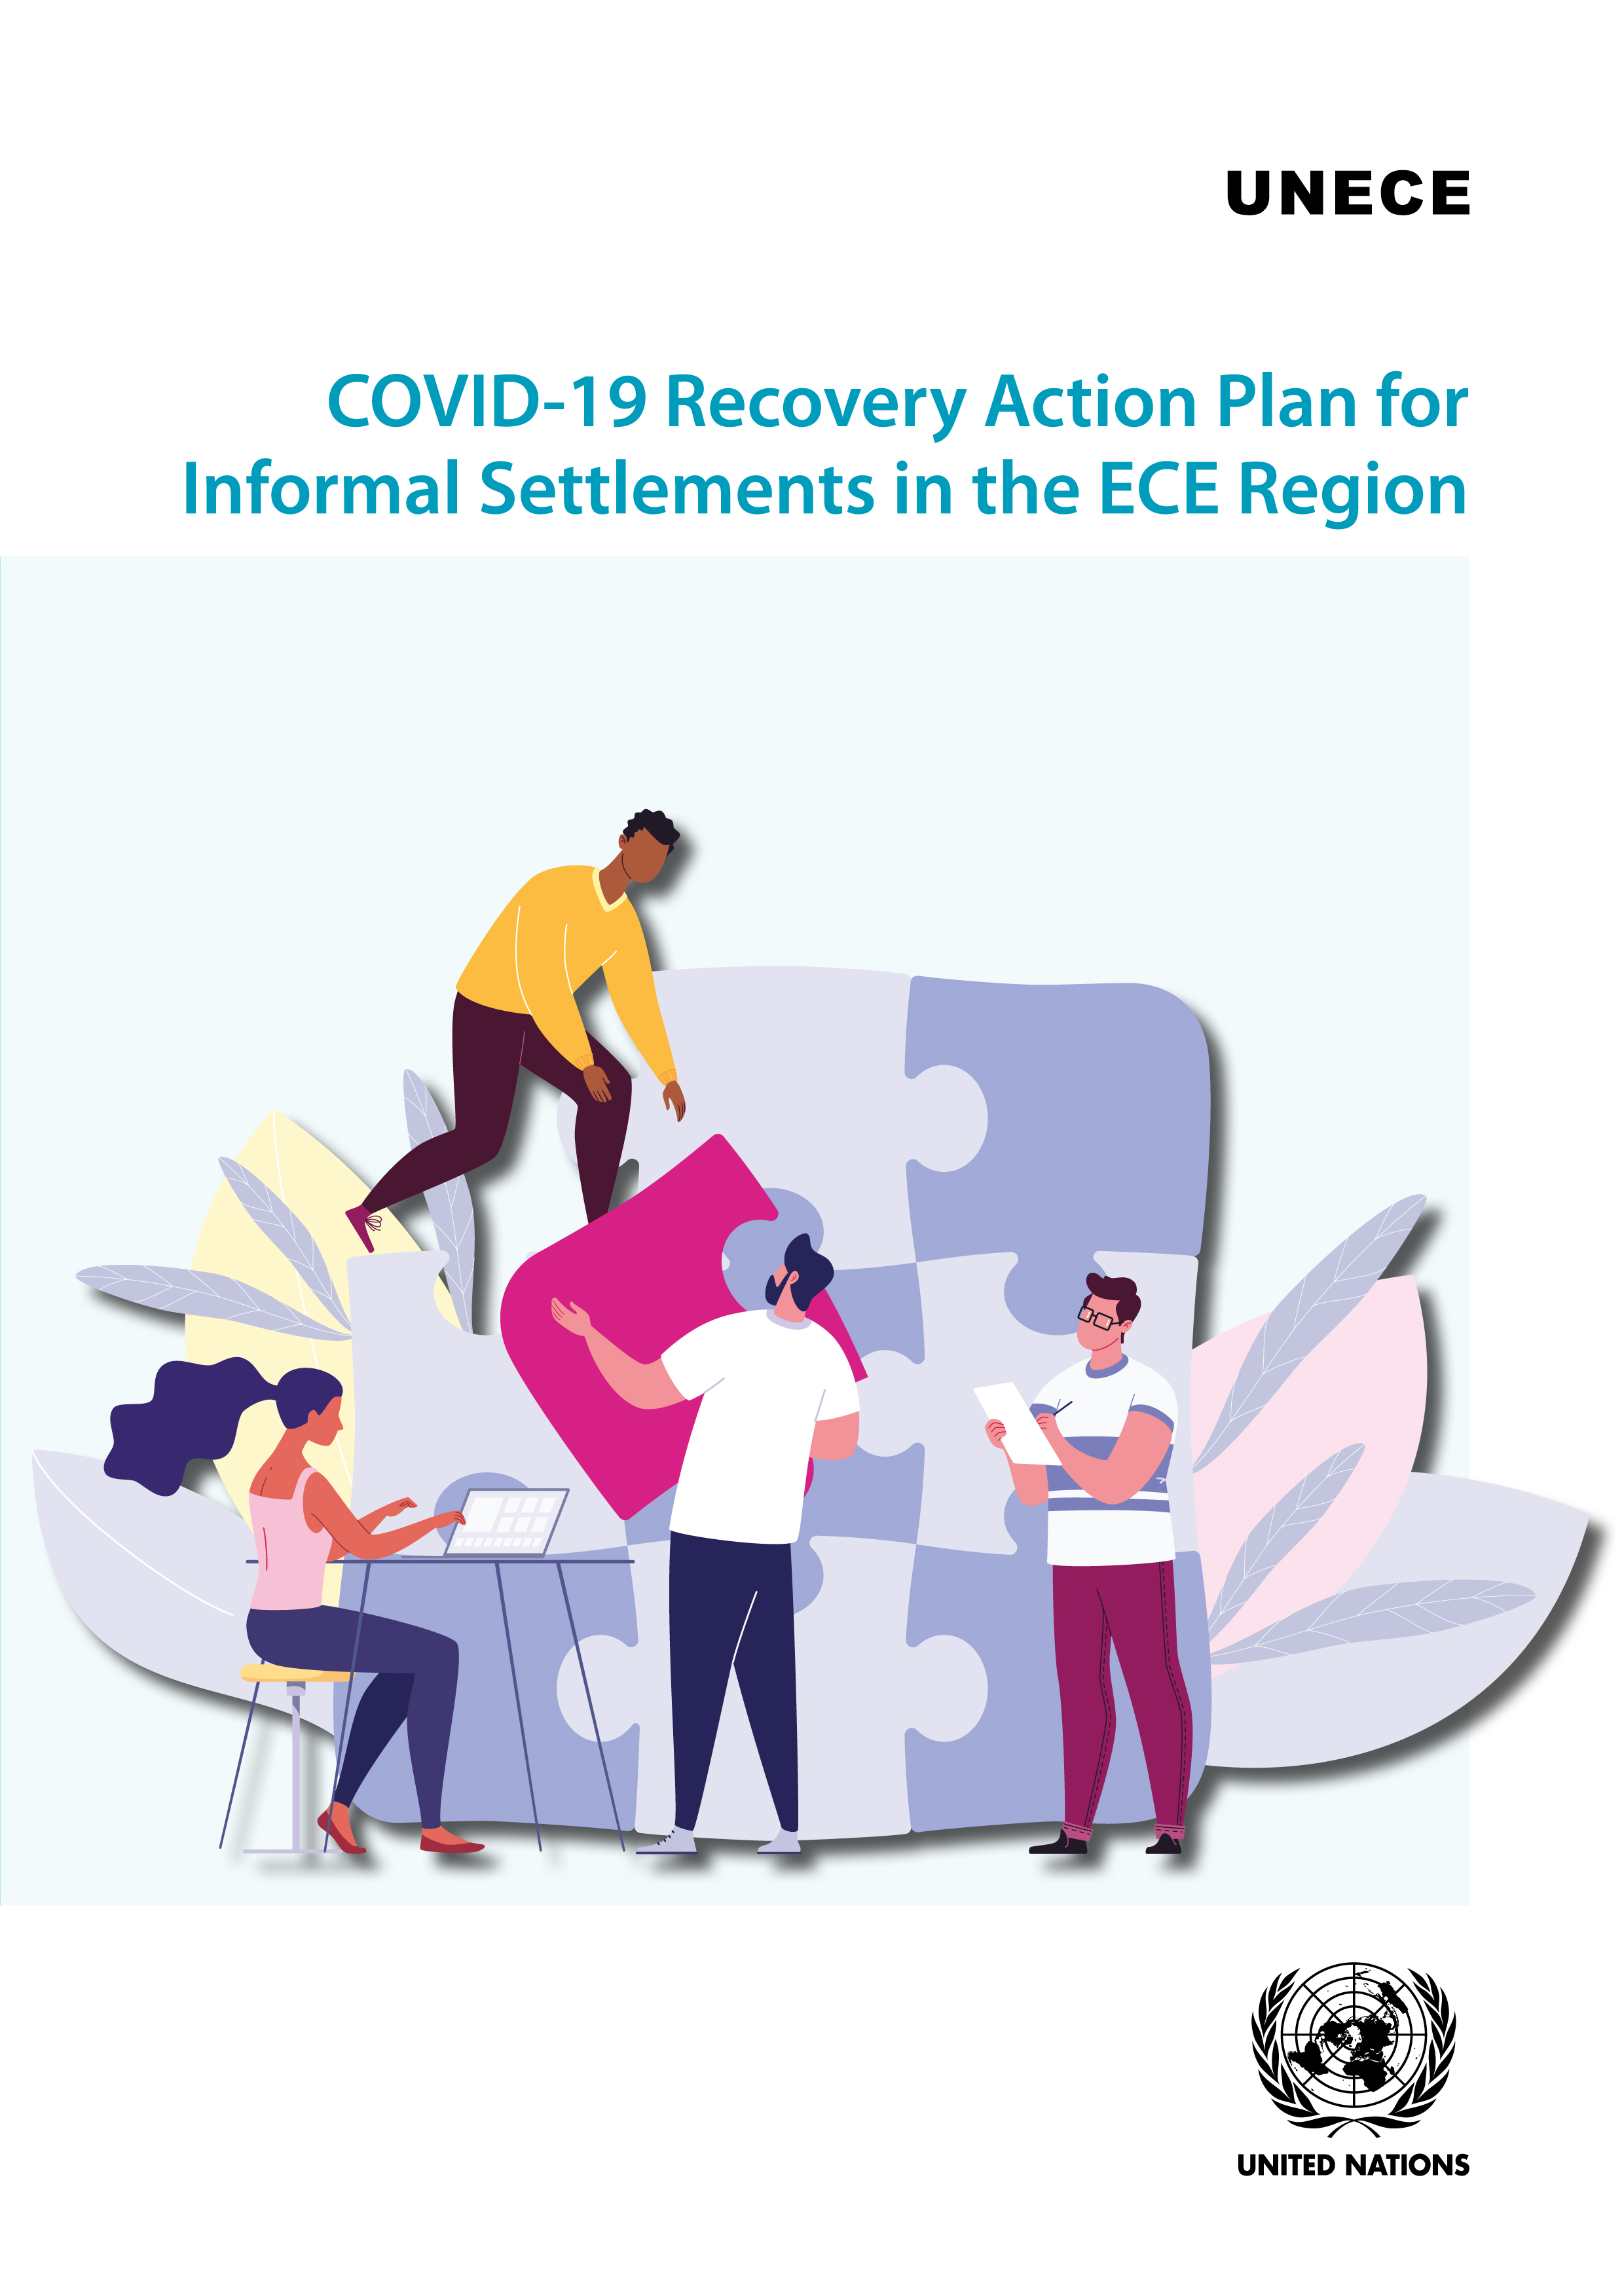 image of COVID-19 Recovery Action Plan for Informal Settlements in the ECE Region